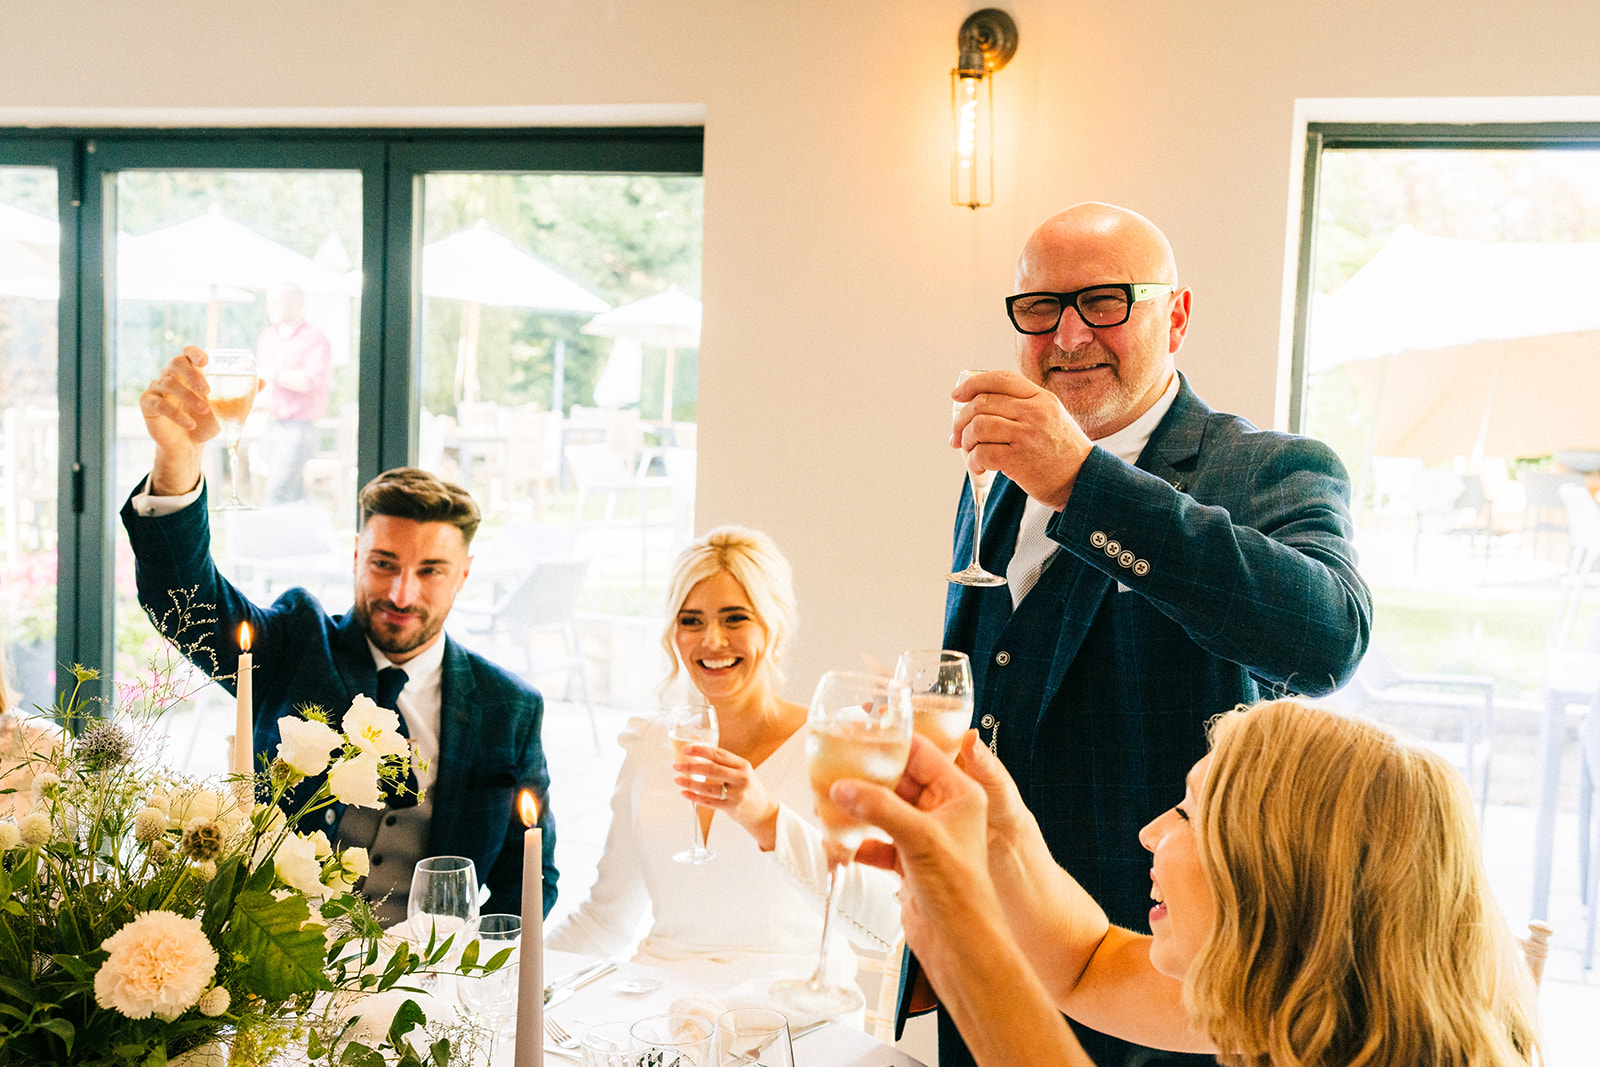 The Chequers Inn Wedding Photography - the father of the bride gives his wedding speech